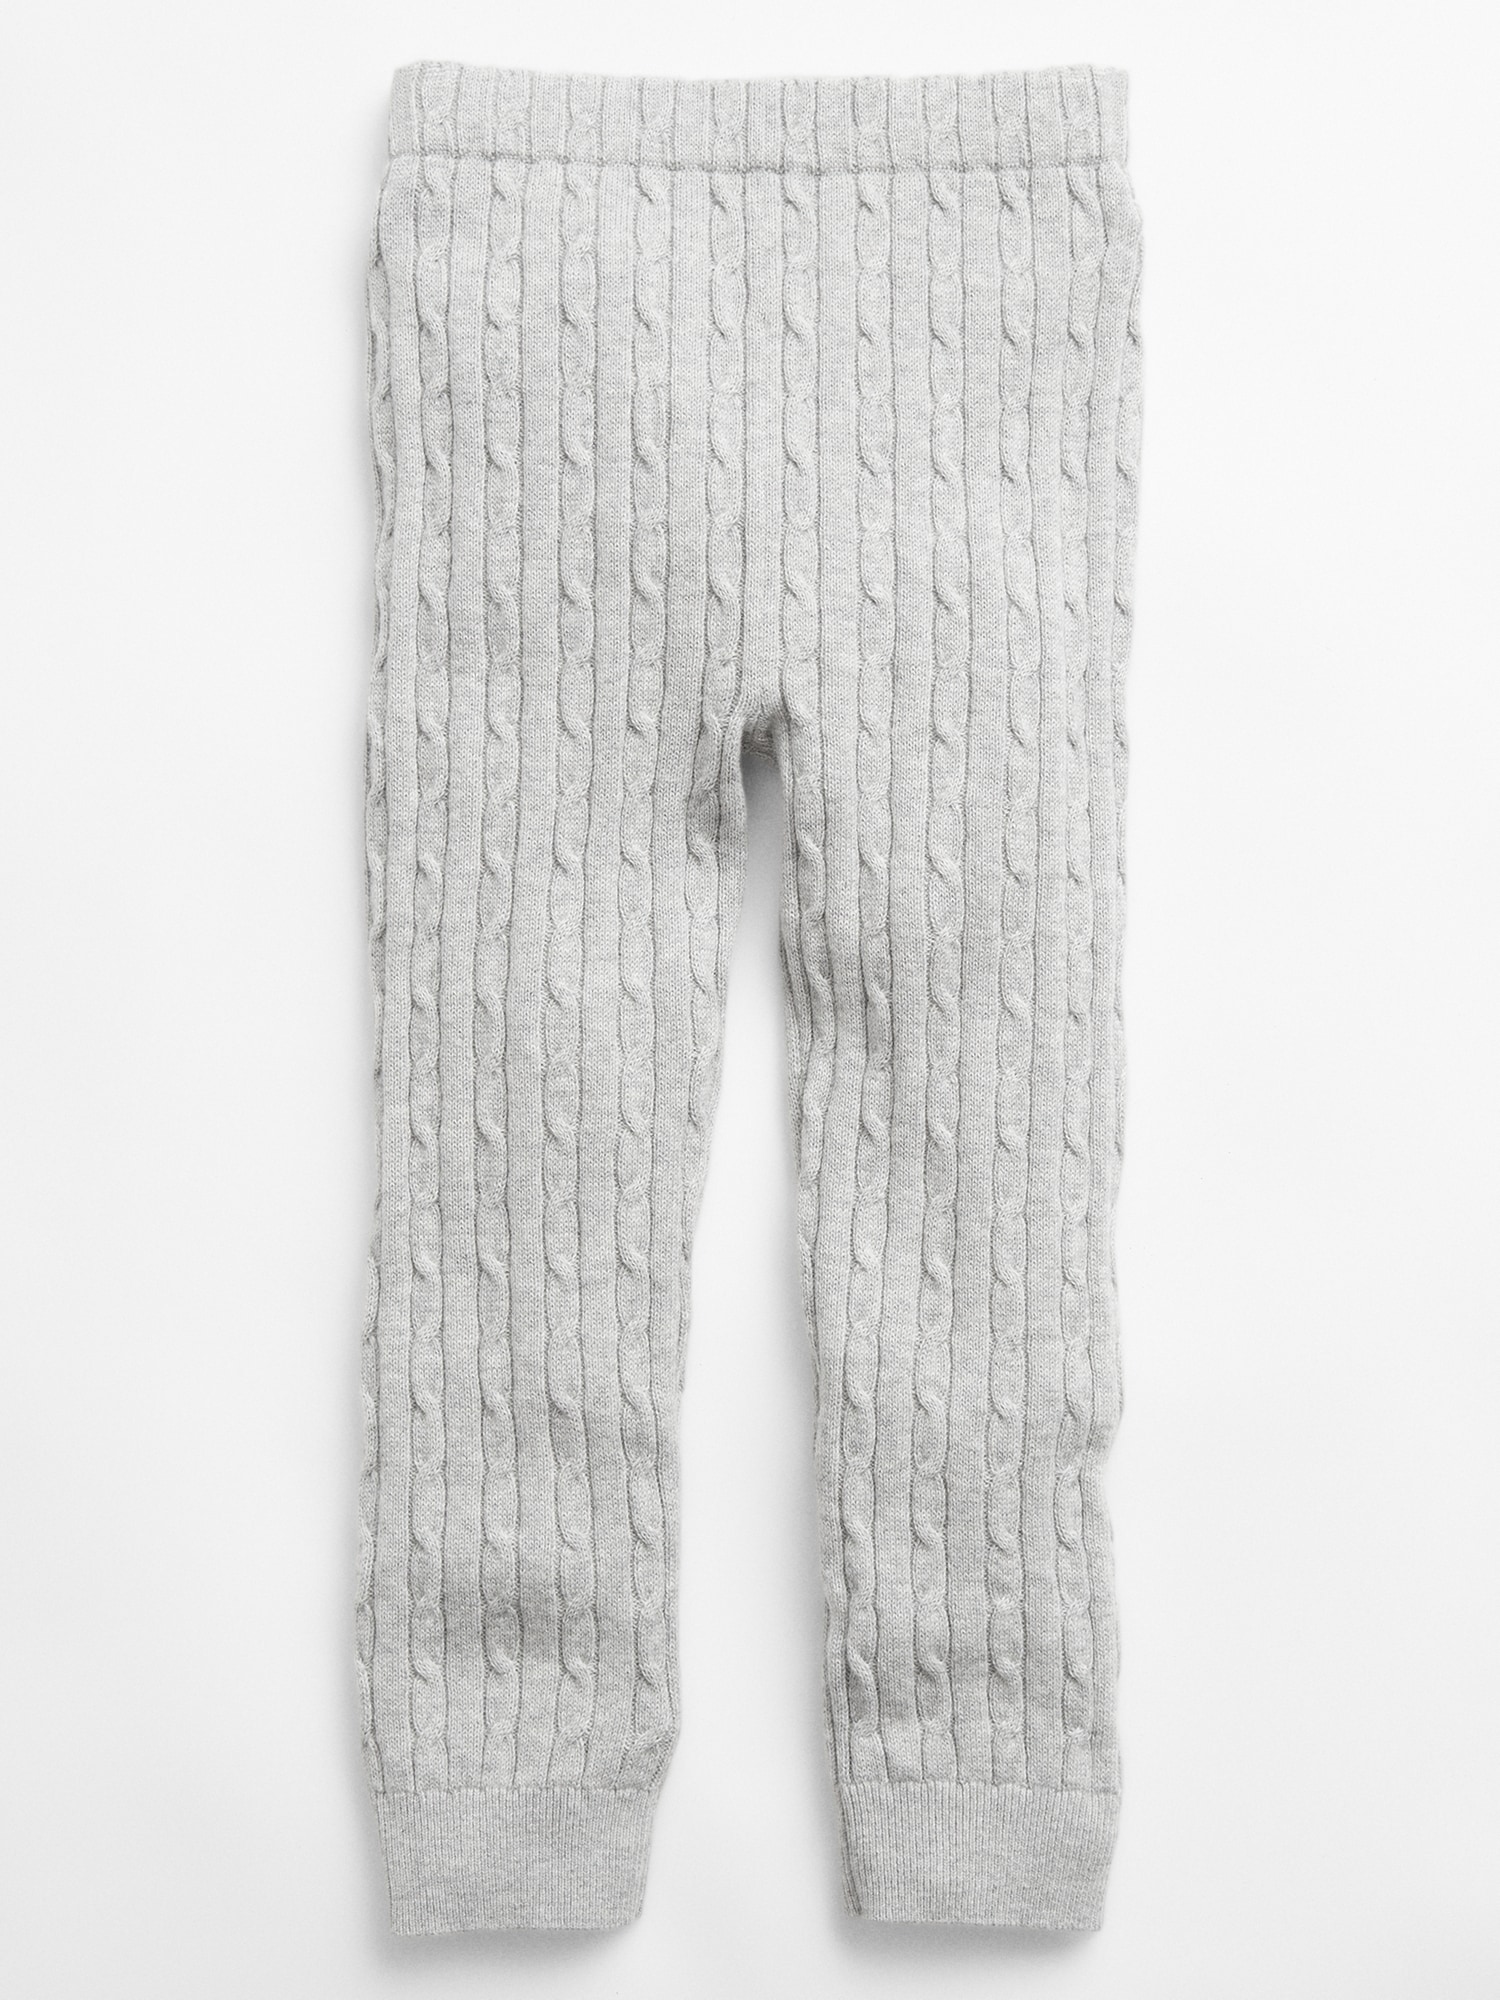 Grey Cable Knit Leggings